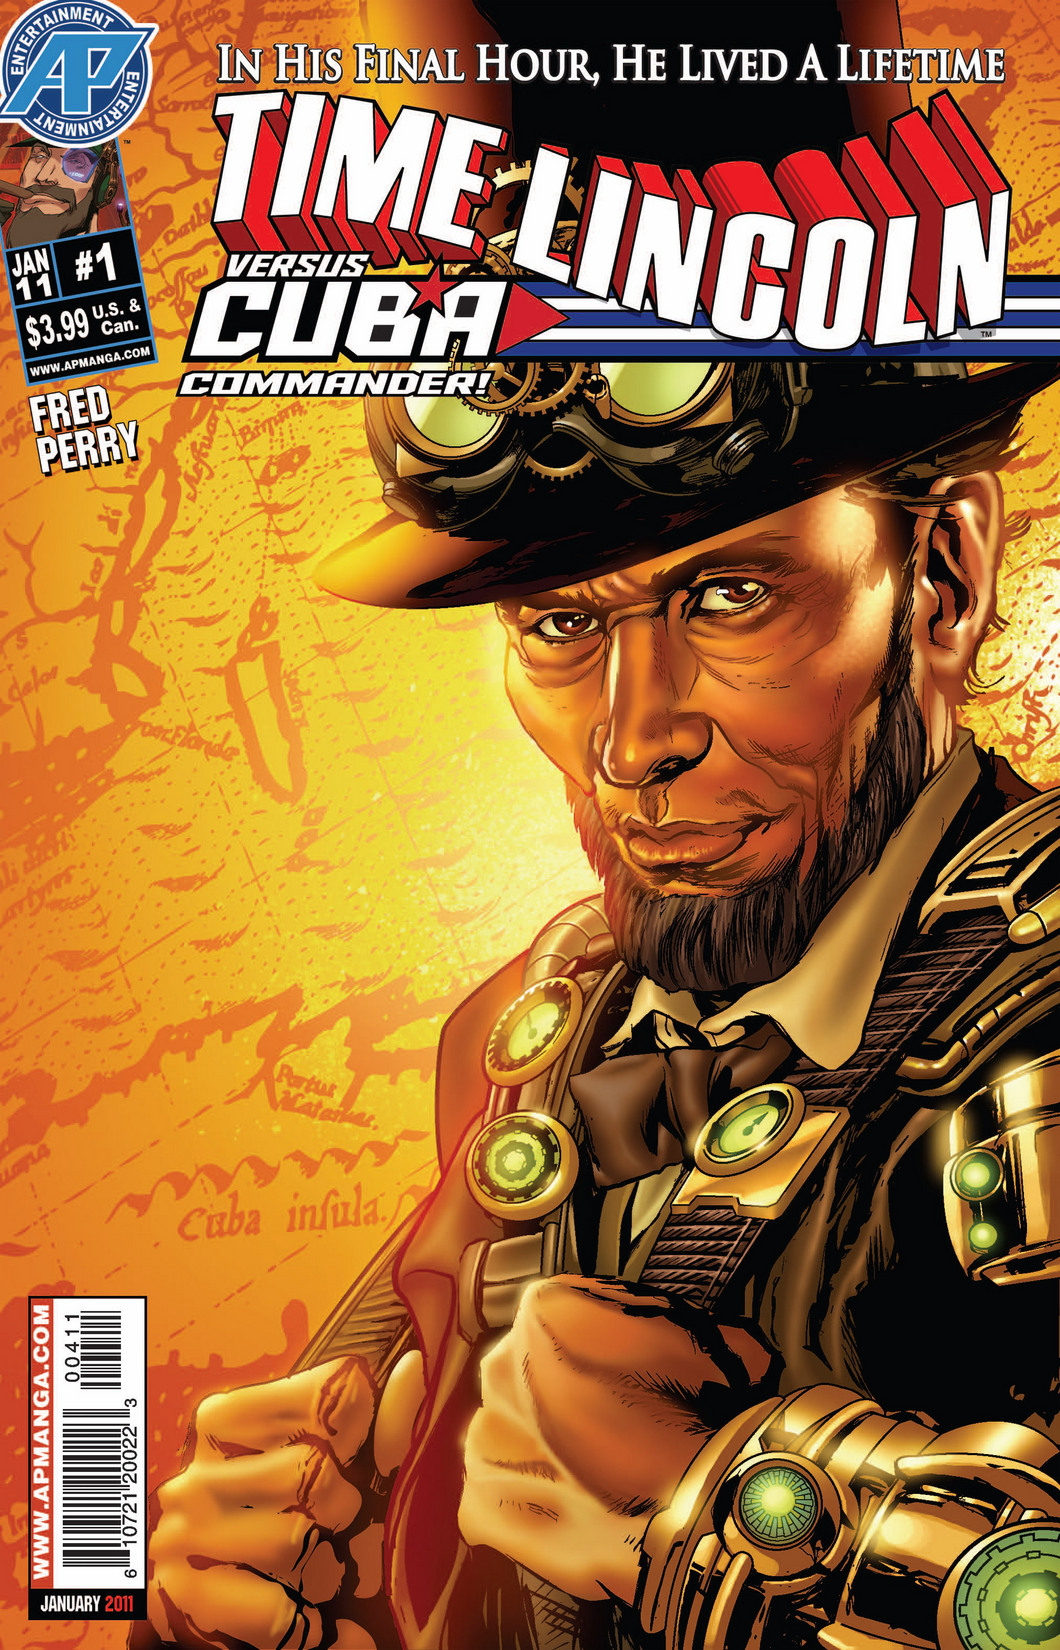 Read online Time Lincoln: Cuba Commander comic -  Issue # Full - 1